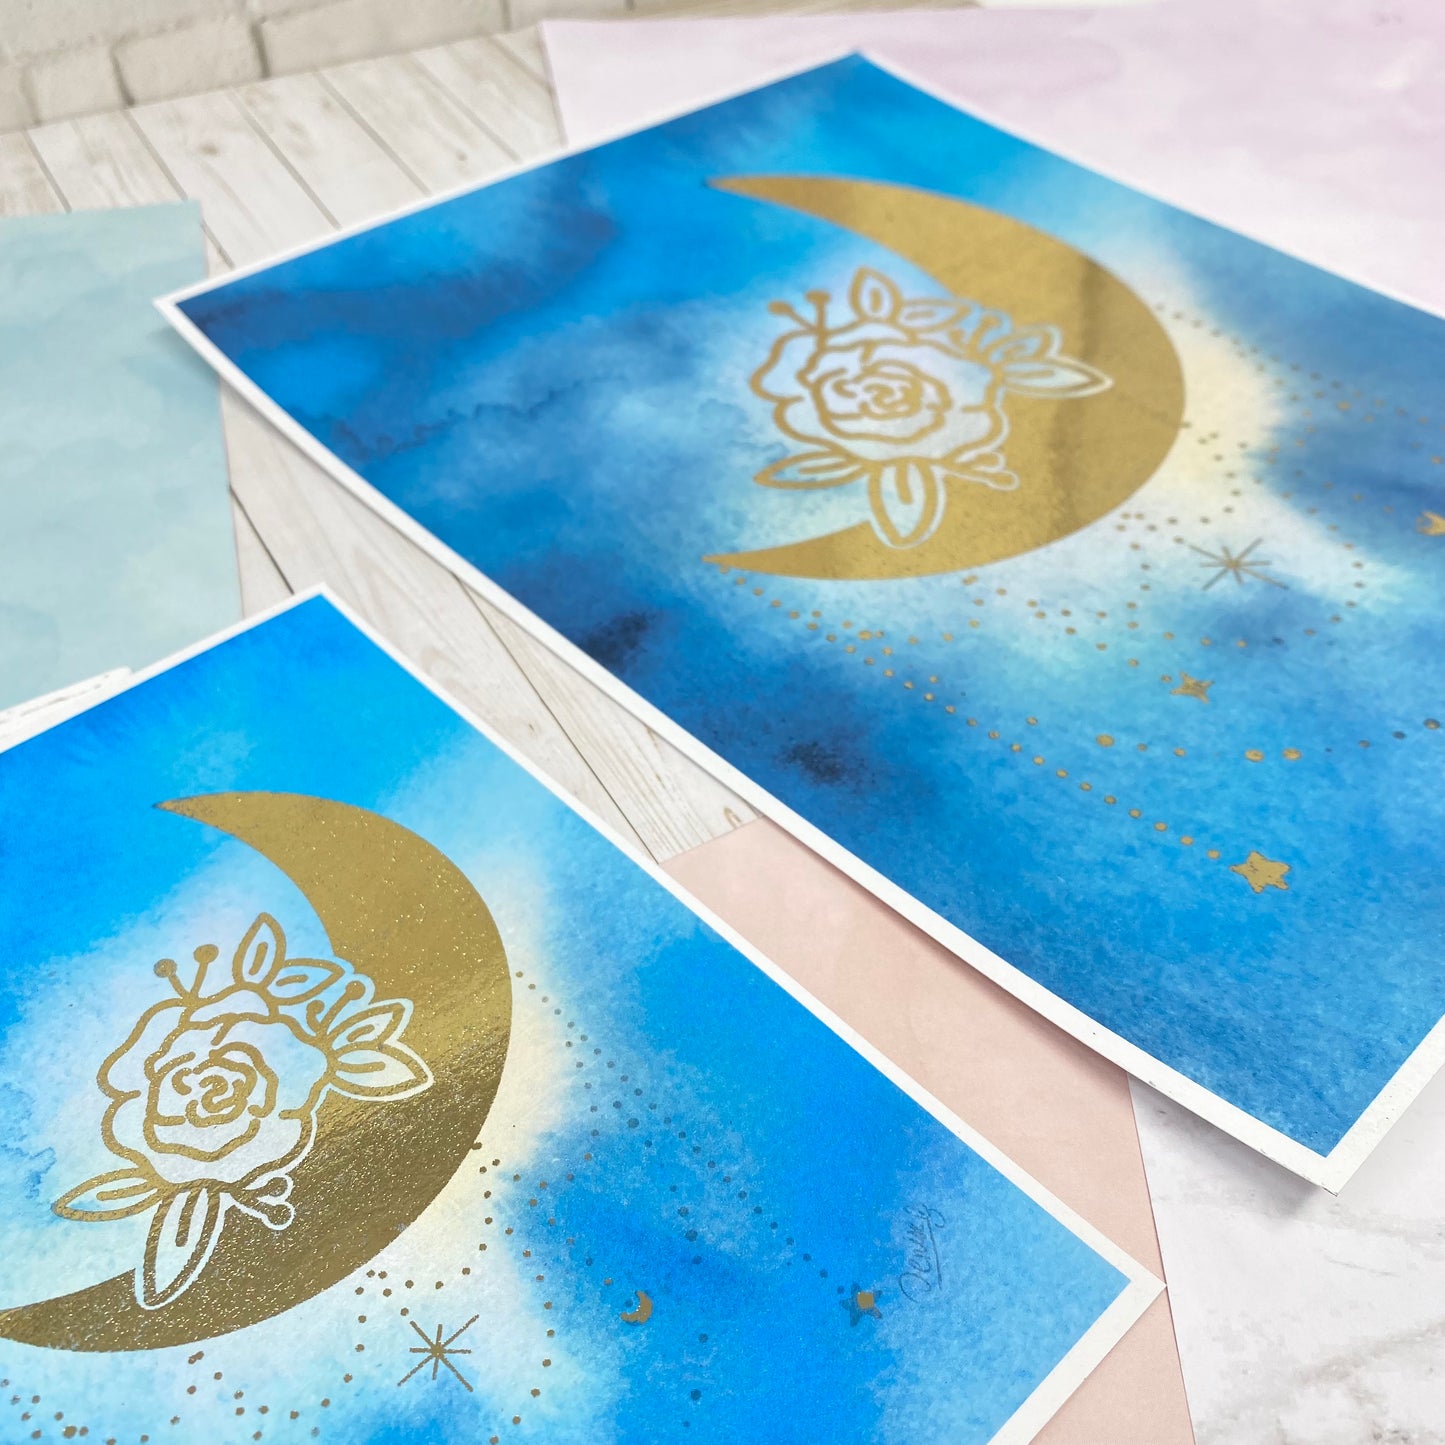 Print - Moon and flowers